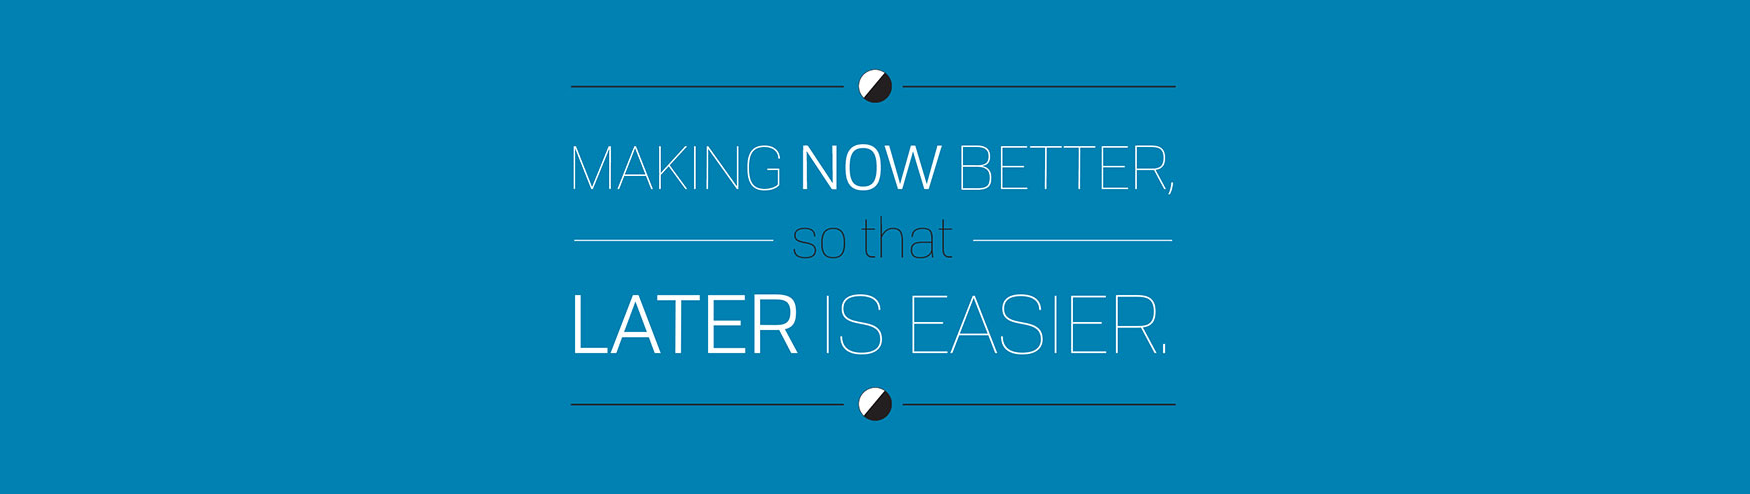 Making Now Better So That Later Is Easier